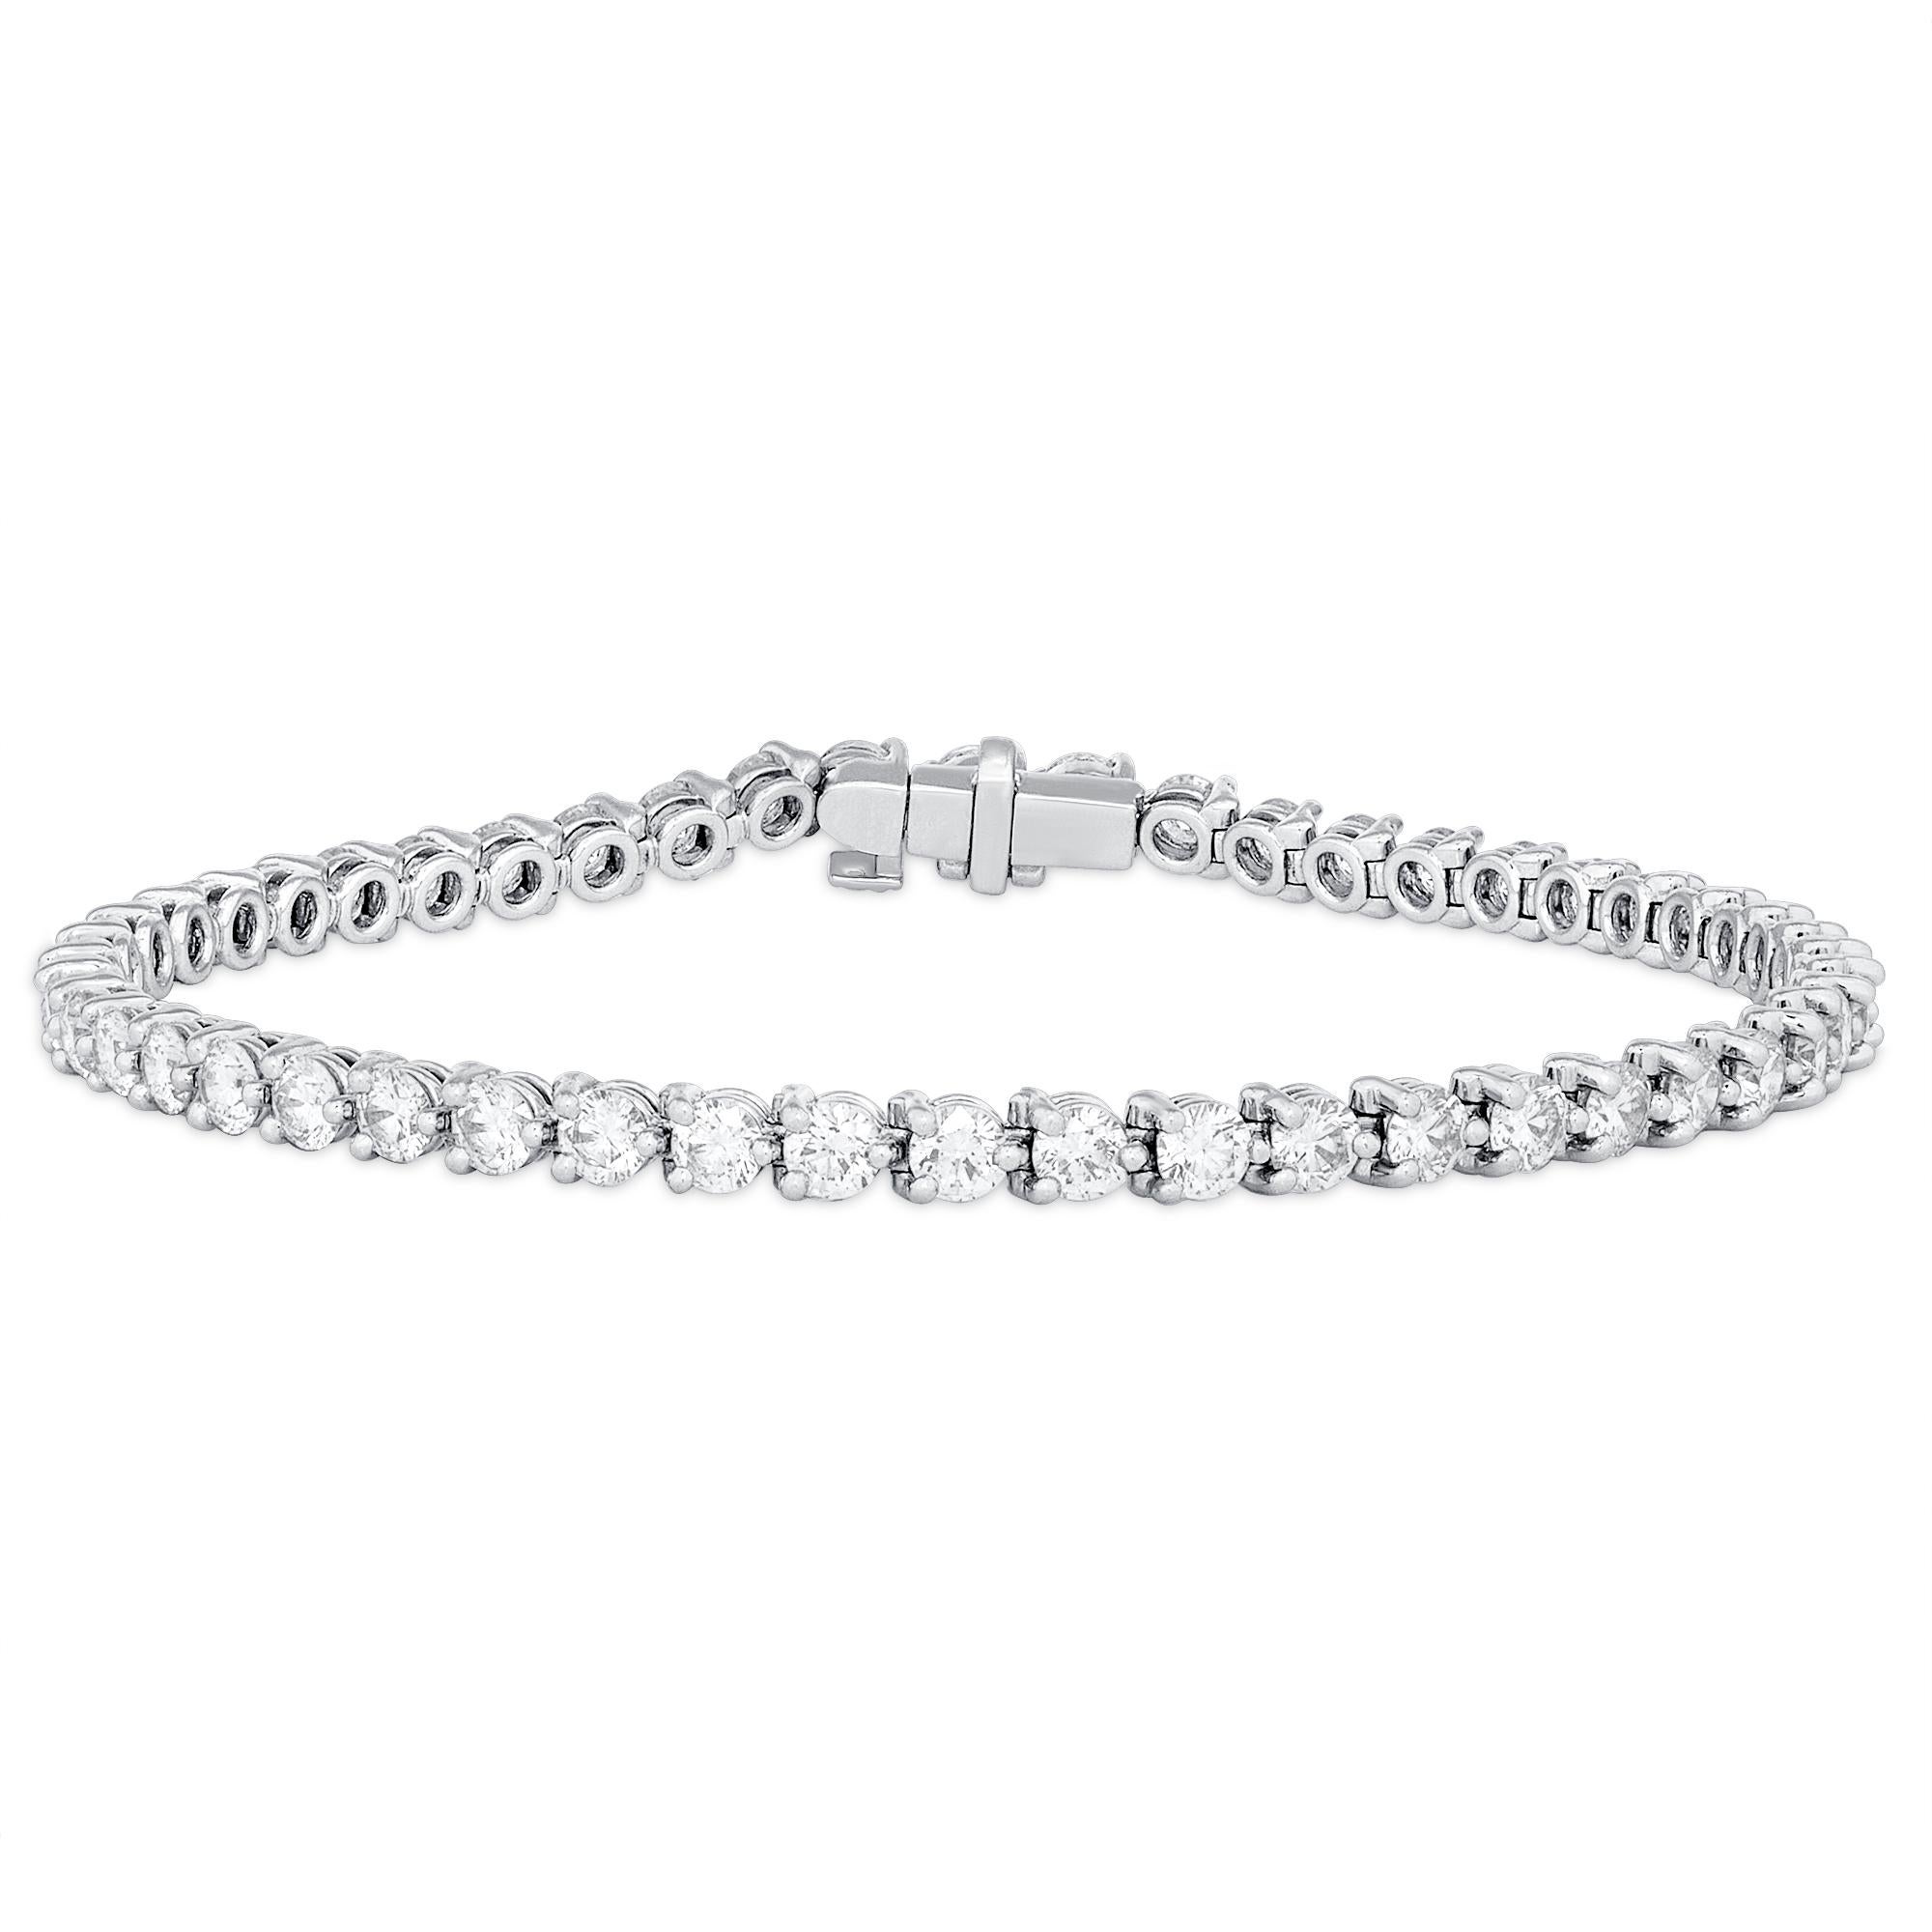 Harry Winston Platinum Round White Diamond Tennis Bracelet 
13 Grams 
50 Round White Diamonds 4.84 Carats Total Weight
Color: D-F 
Clarity: VS2+

This is a timeless Harry Winston Tennis bracelet. The diamonds are all white and bright, perfect